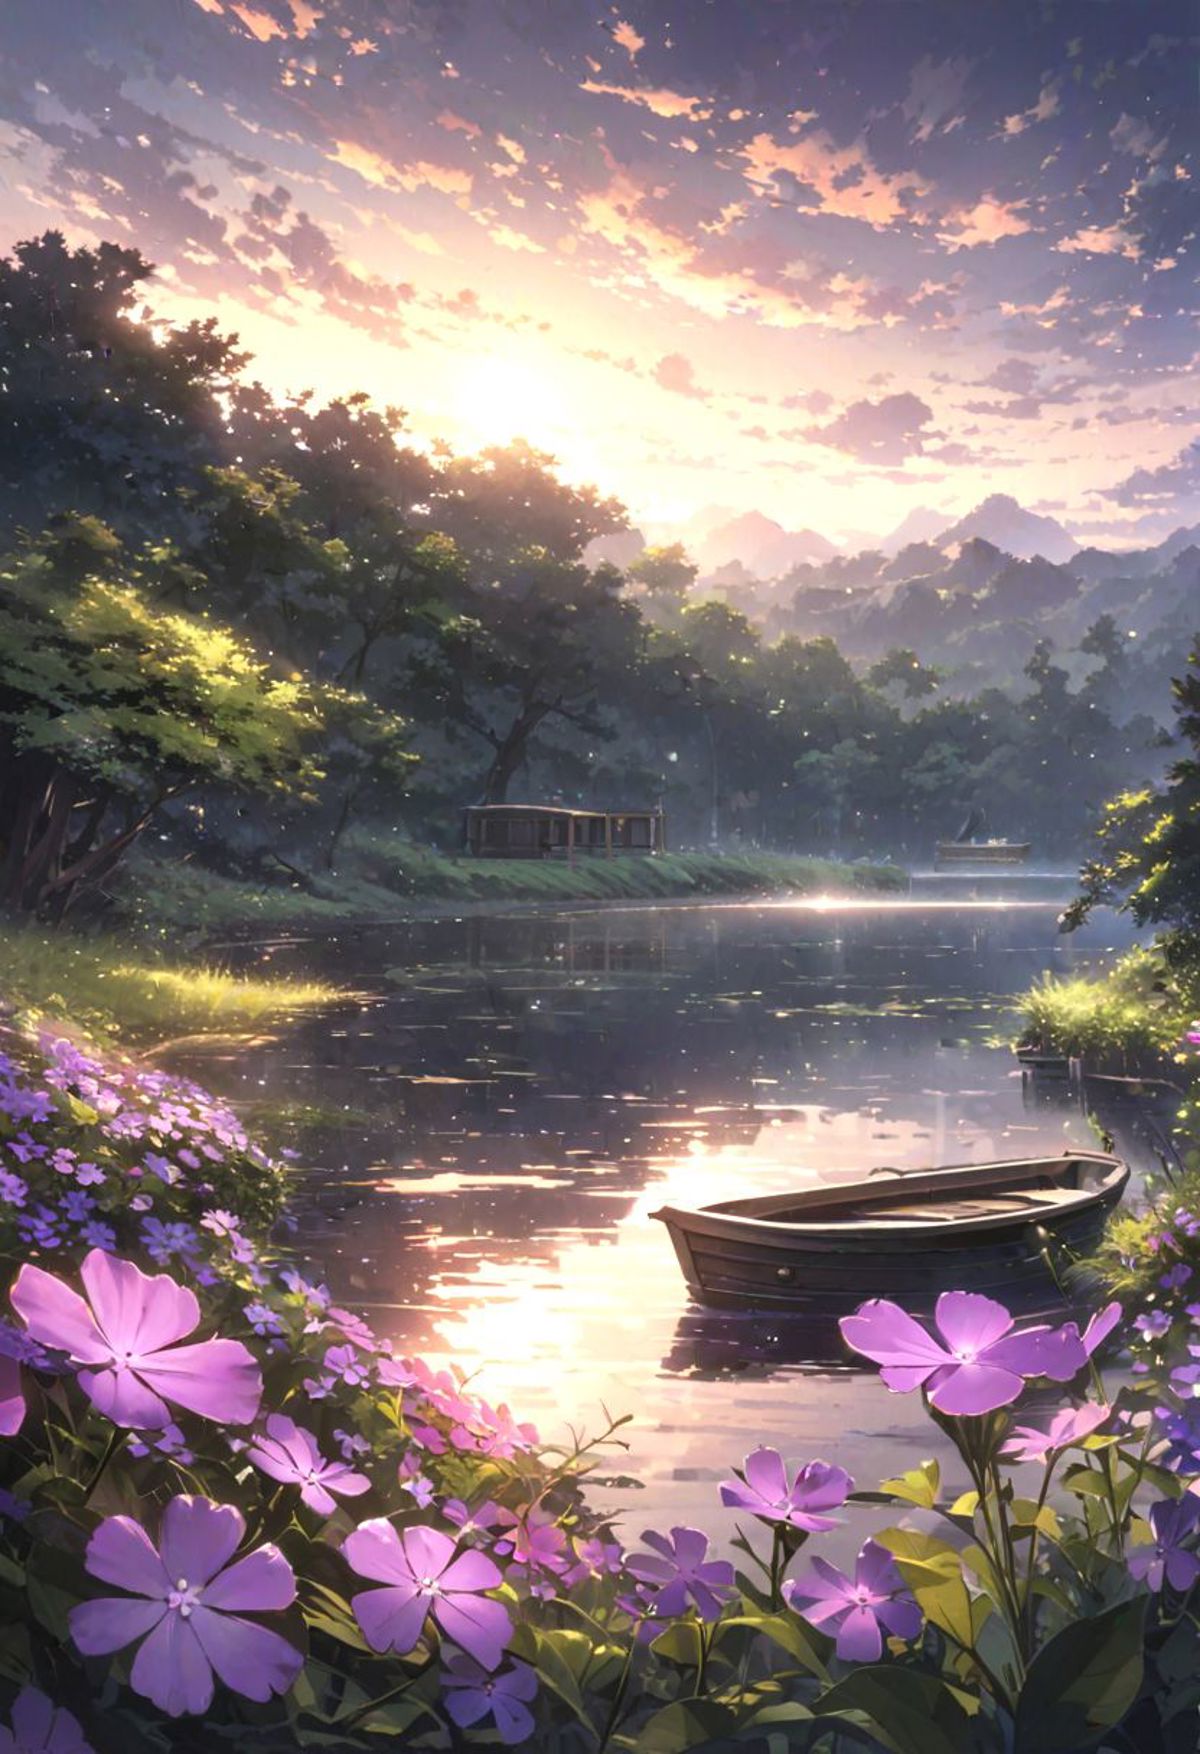 detailed background,( Calm spring night landscape), amongst lush greenery, beautiful view, creeping phlox in full bloom, c...